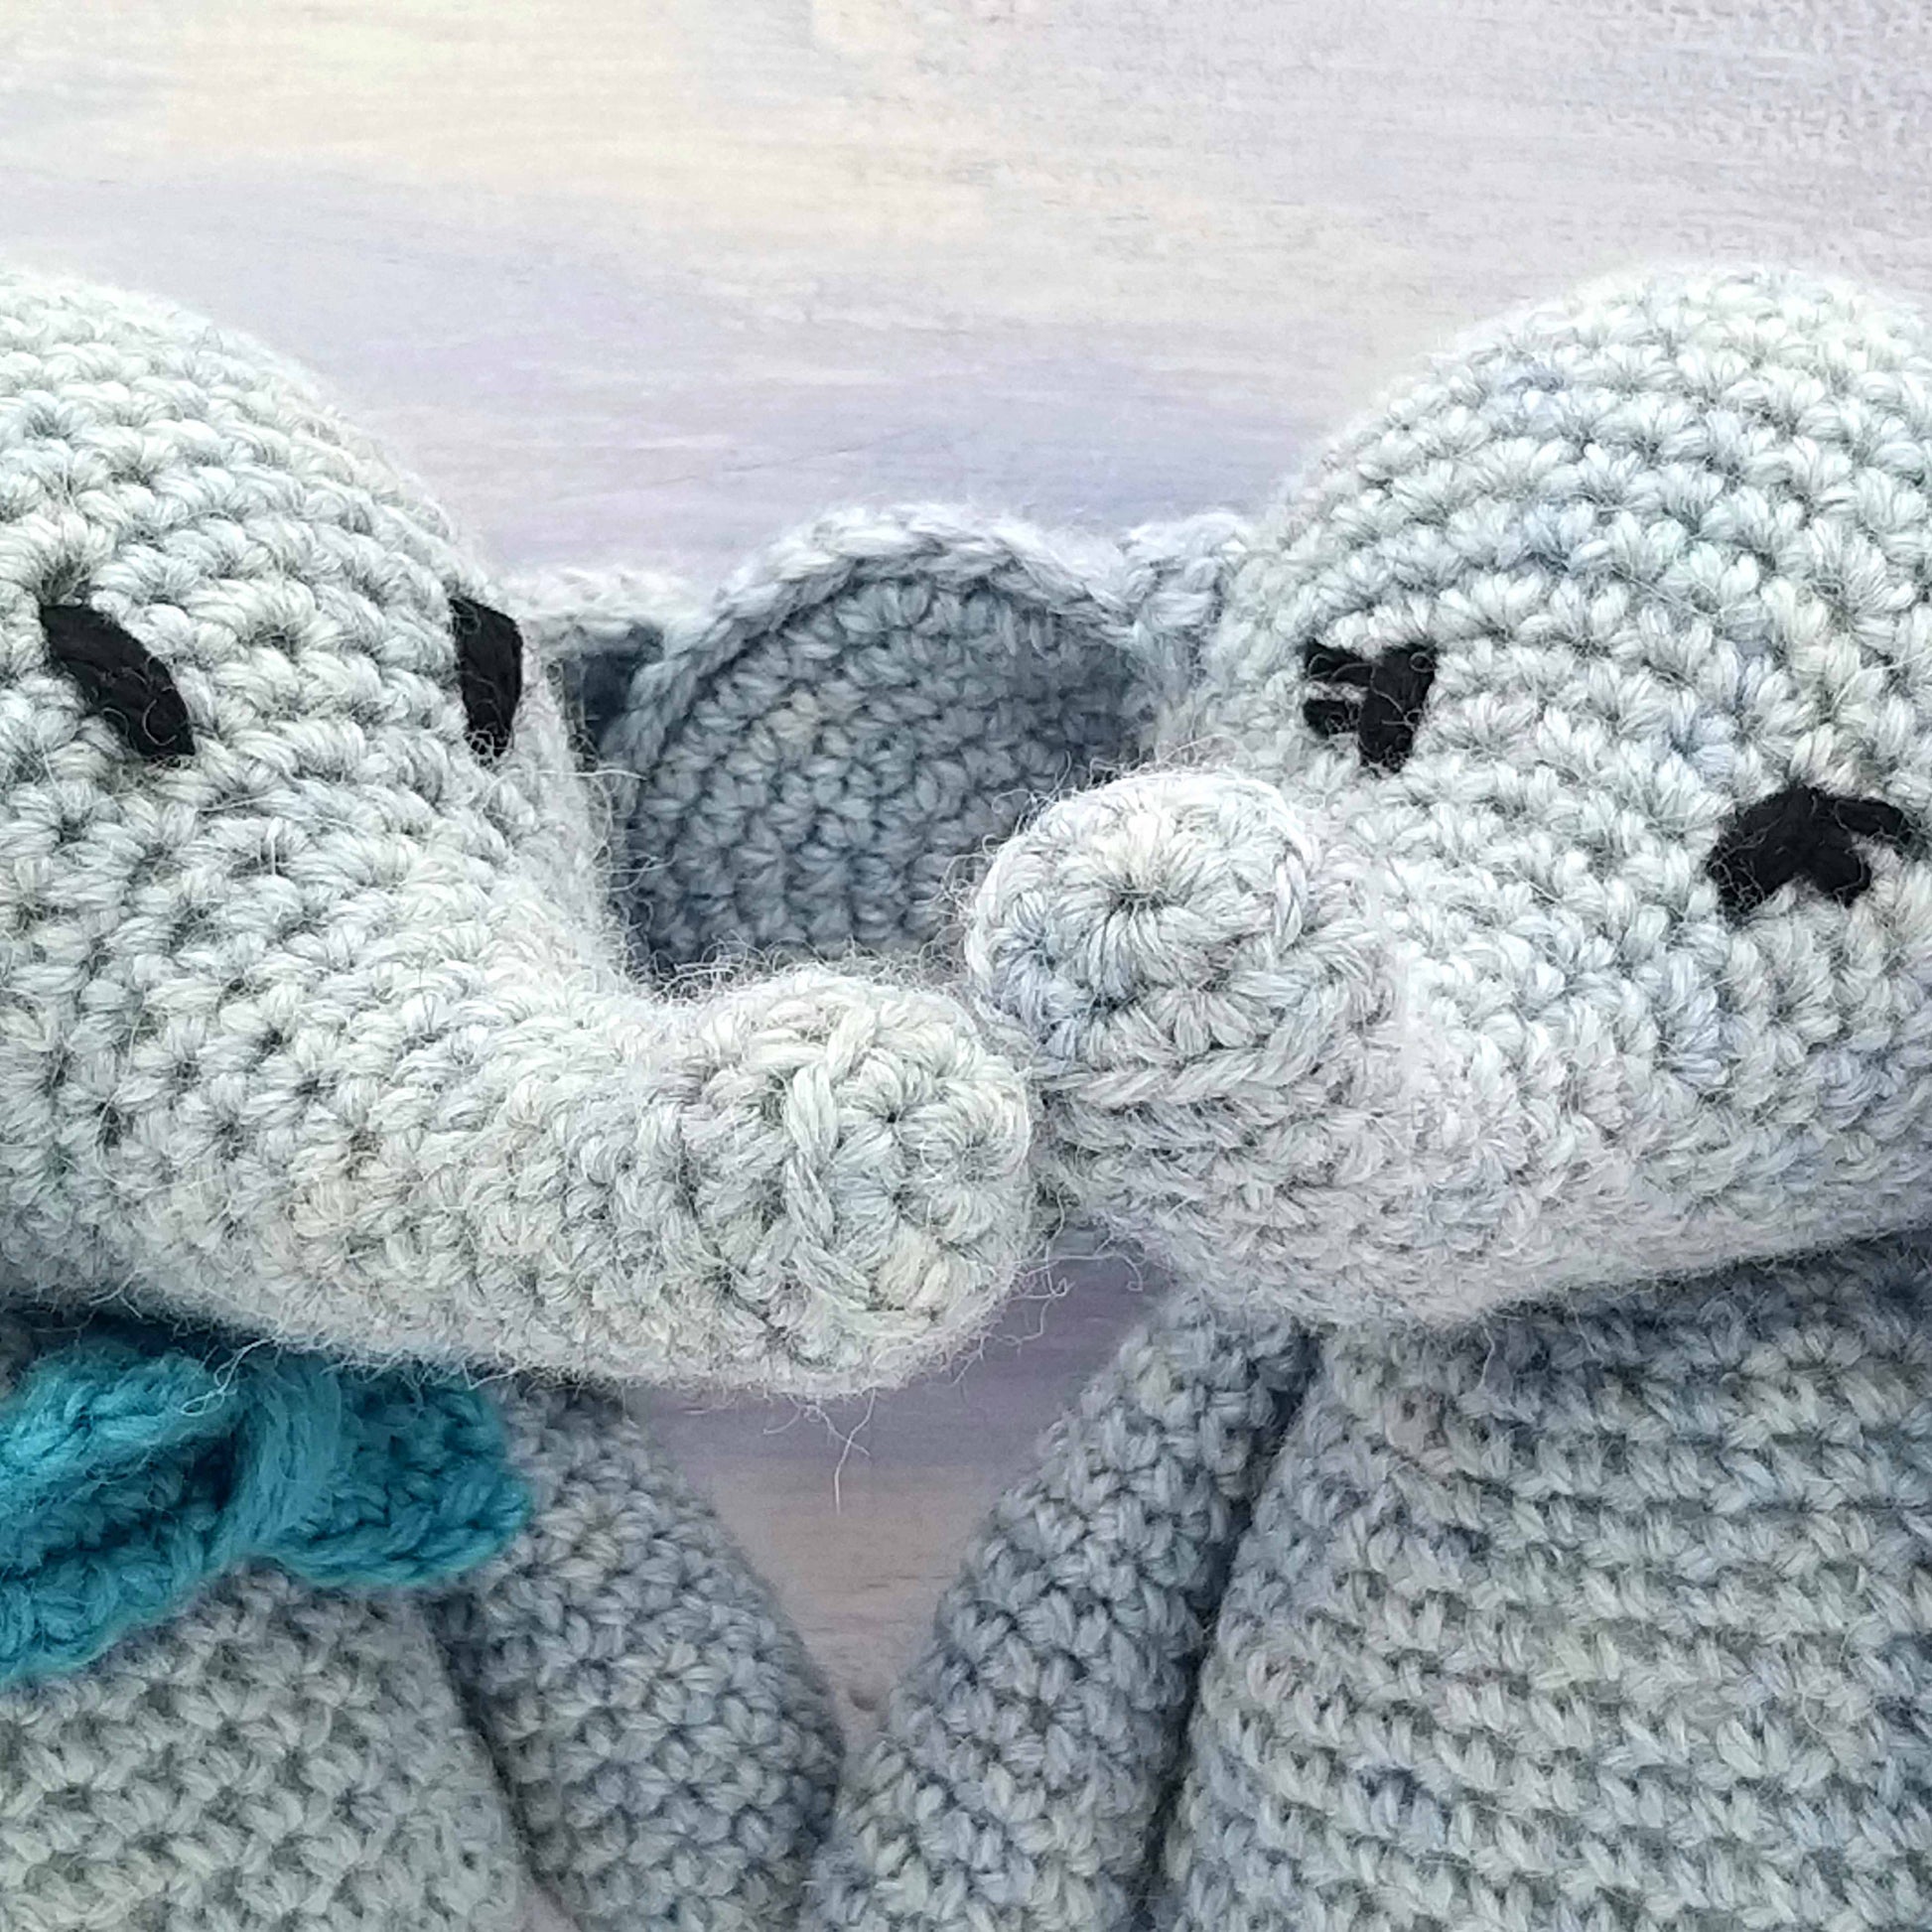 Close up of crochet stitching on toy elephants trunk